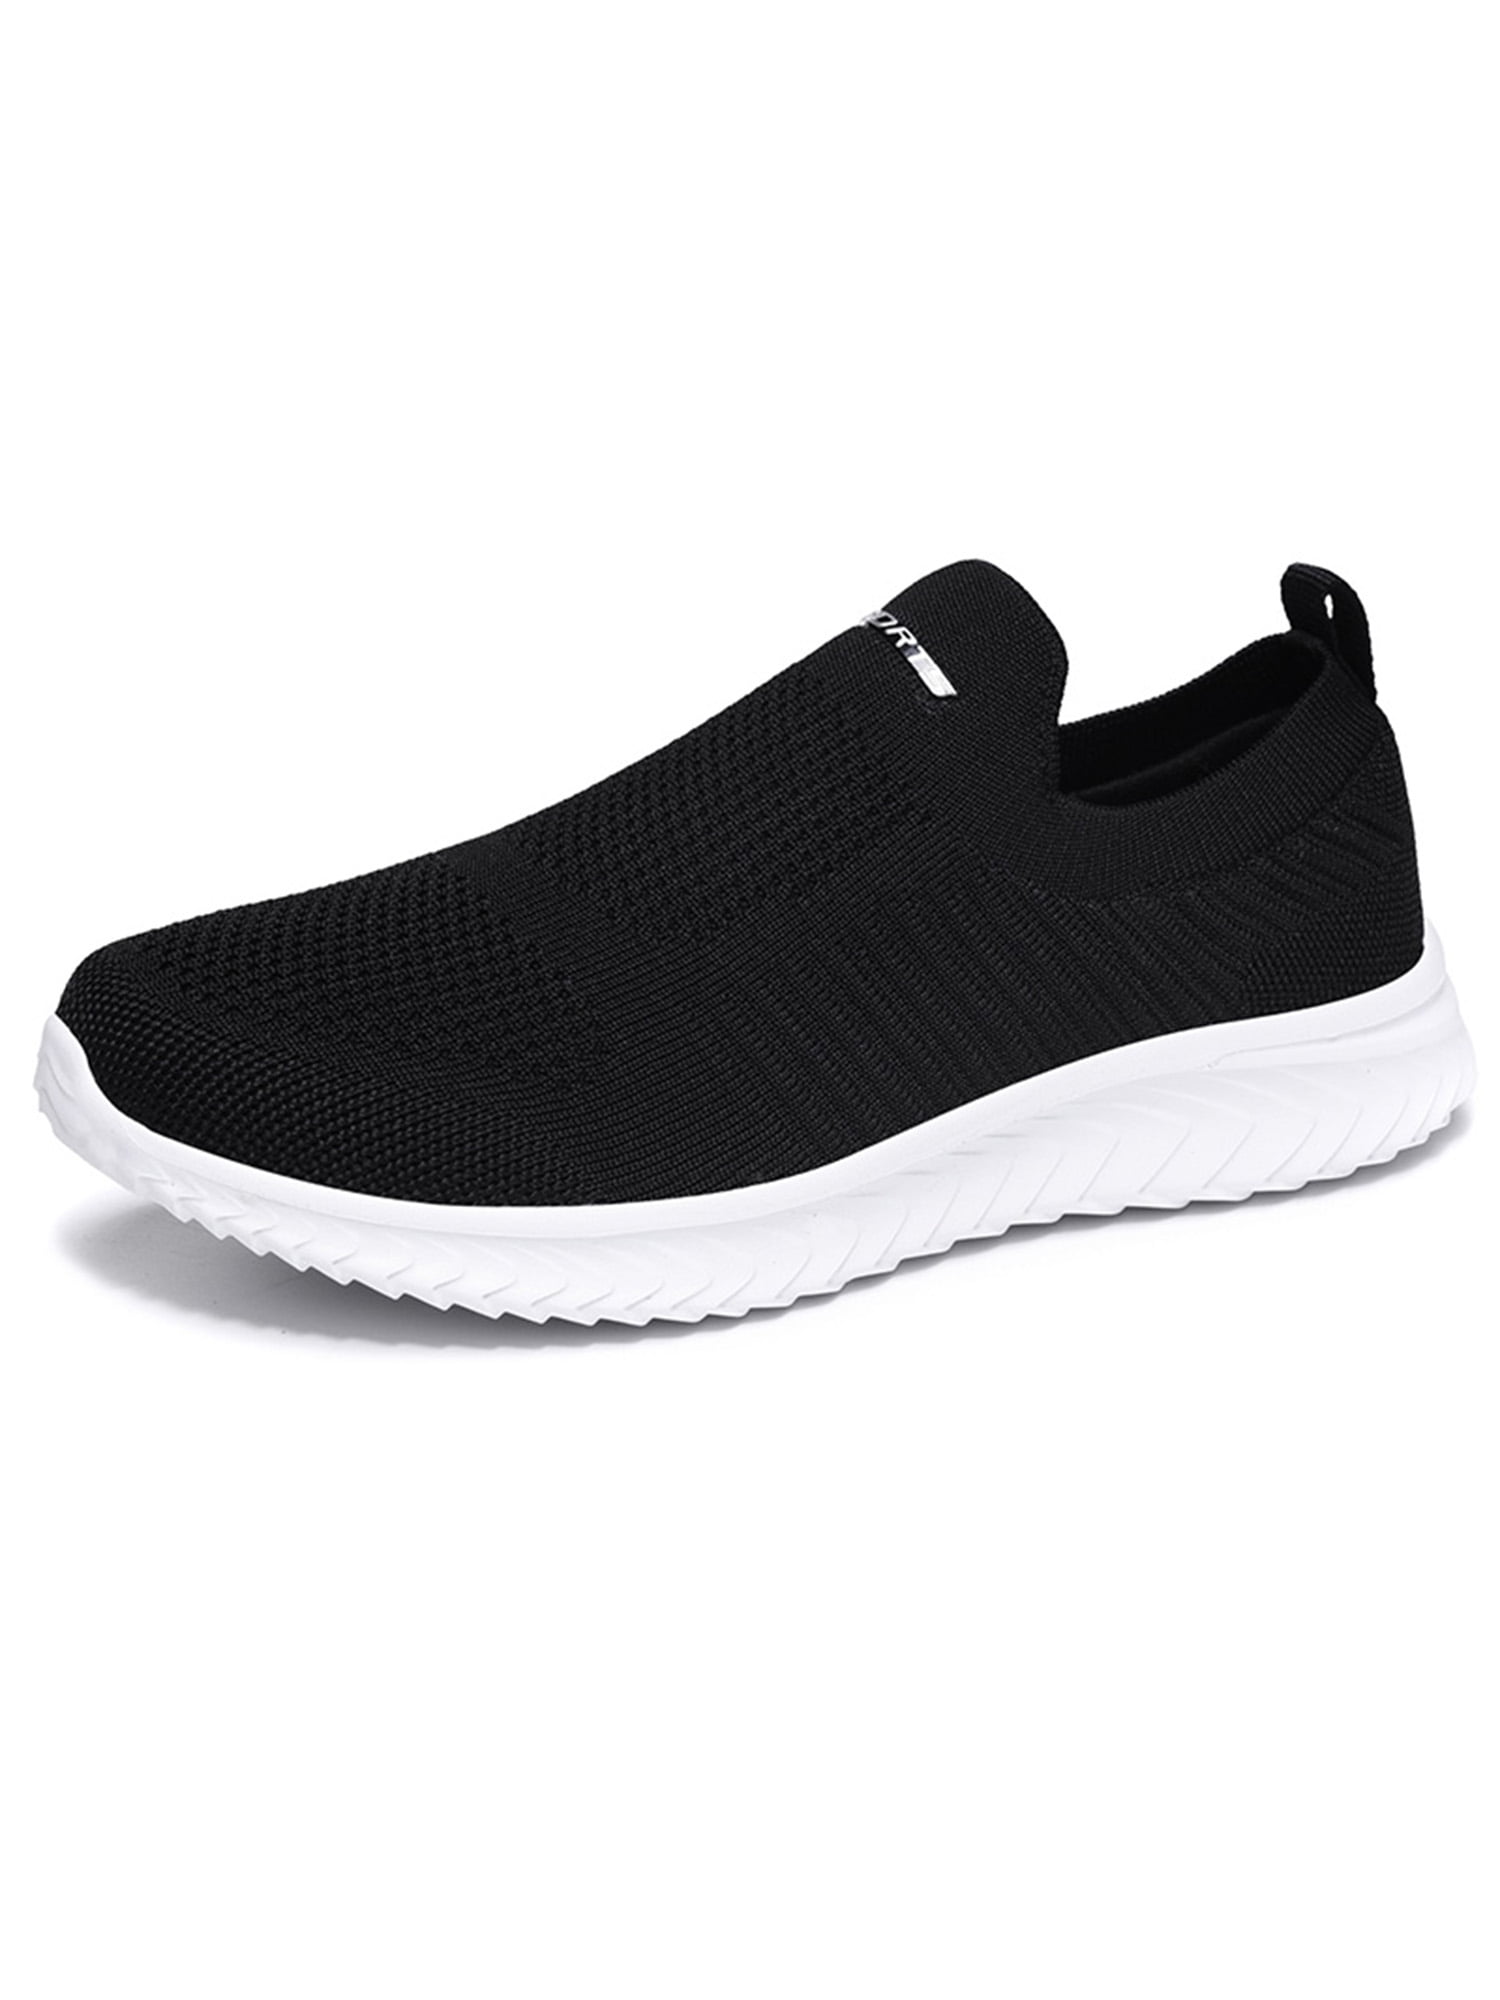 Unisex Women Men Athletic Breathable Sneaker Slip On SportS Casual Low Top Shoes 